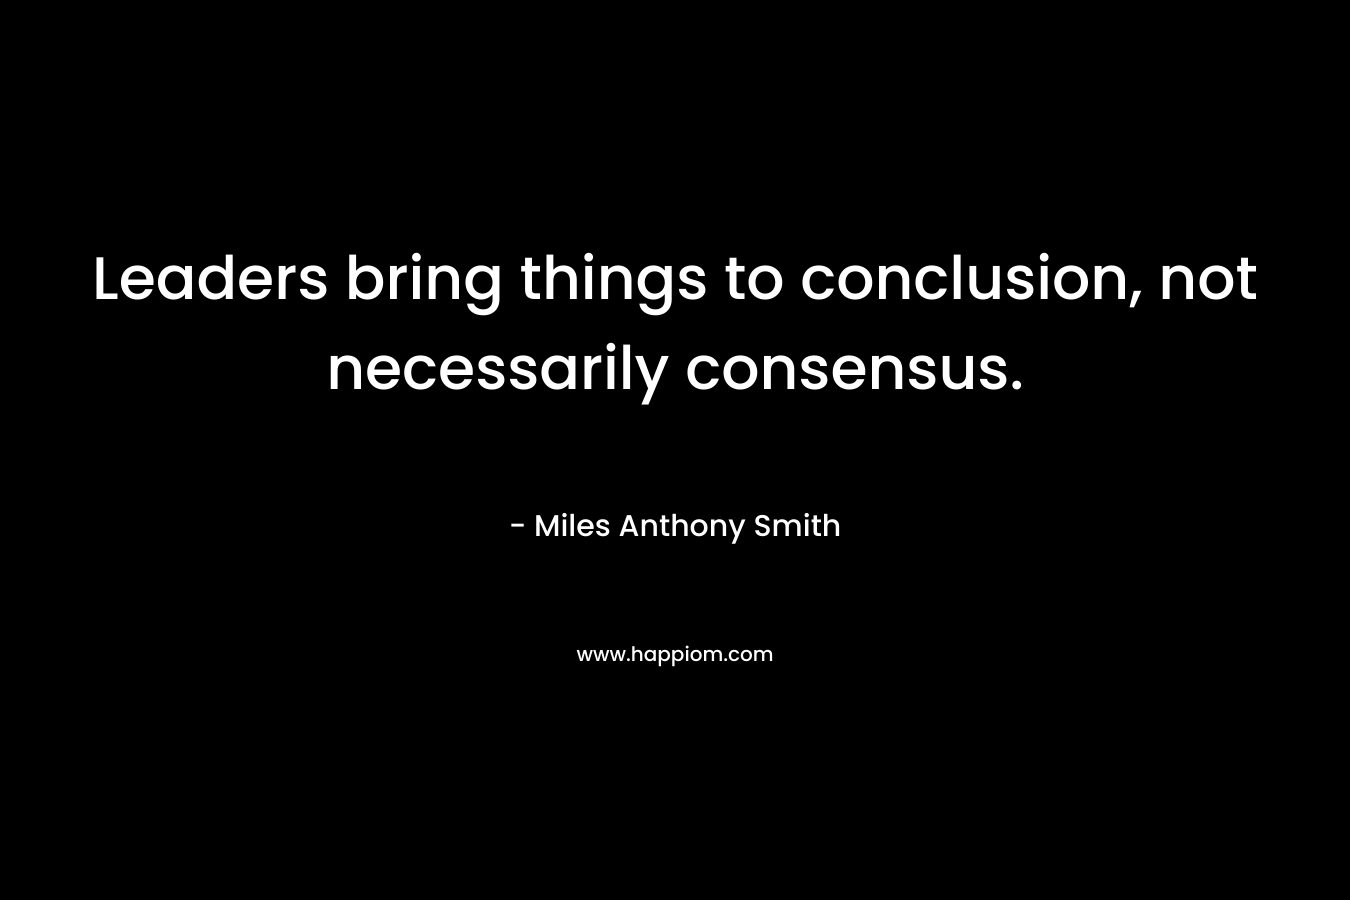 Leaders bring things to conclusion, not necessarily consensus.